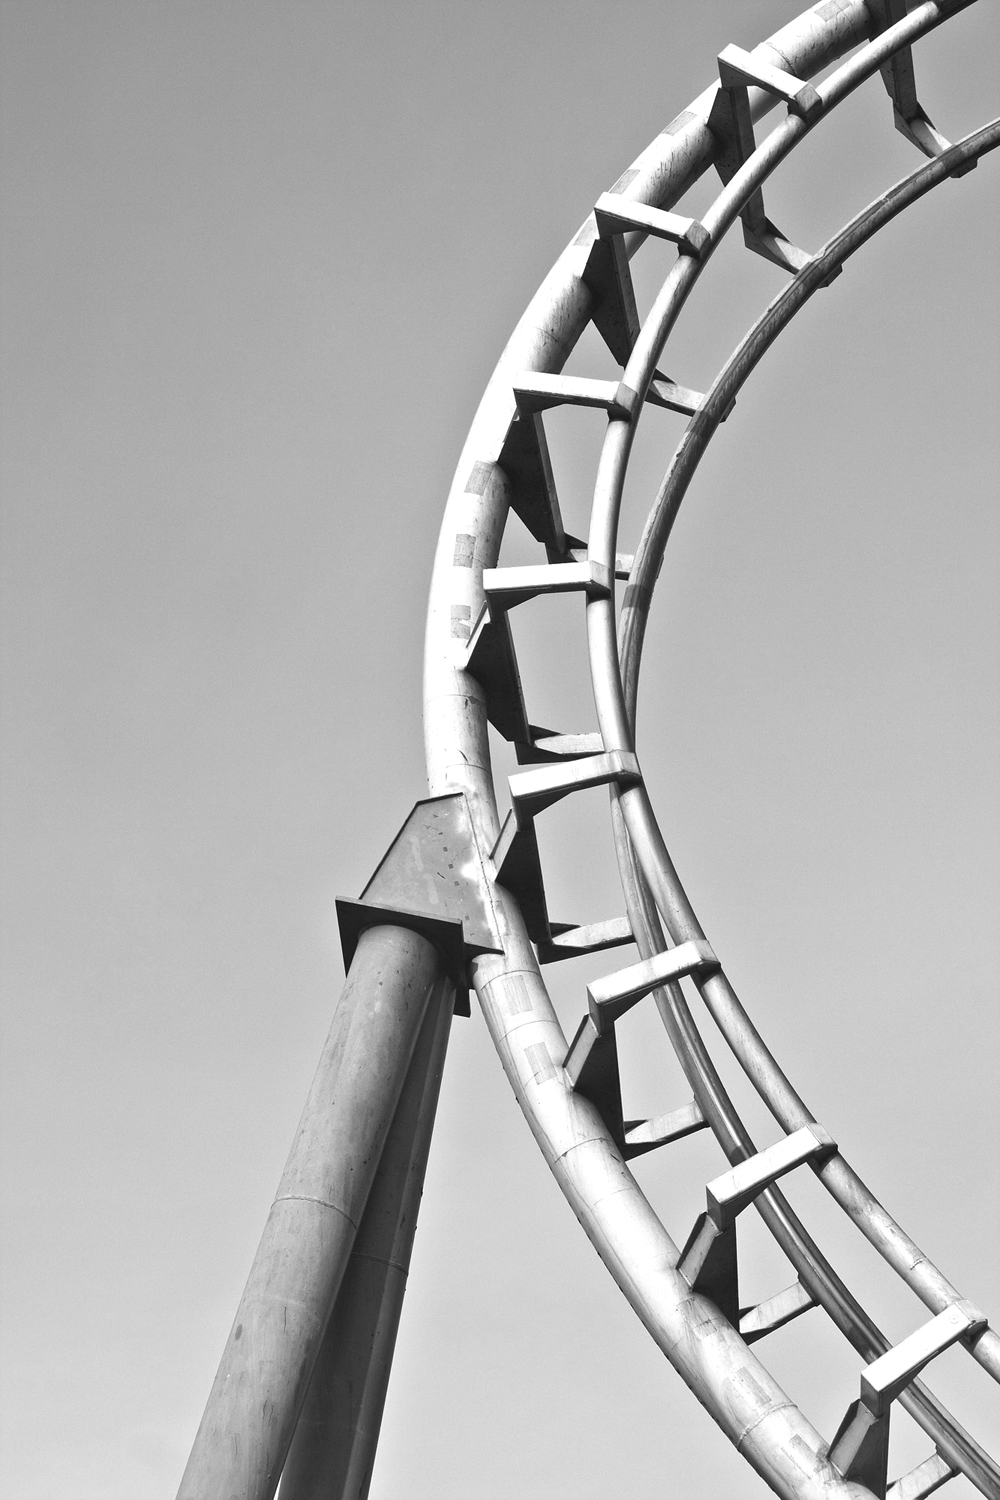 A photograph of a rollercoaster to illustrate the flash fiction "Theme Park Love Story" by Charlie Hill, published in issue 33 of Neon